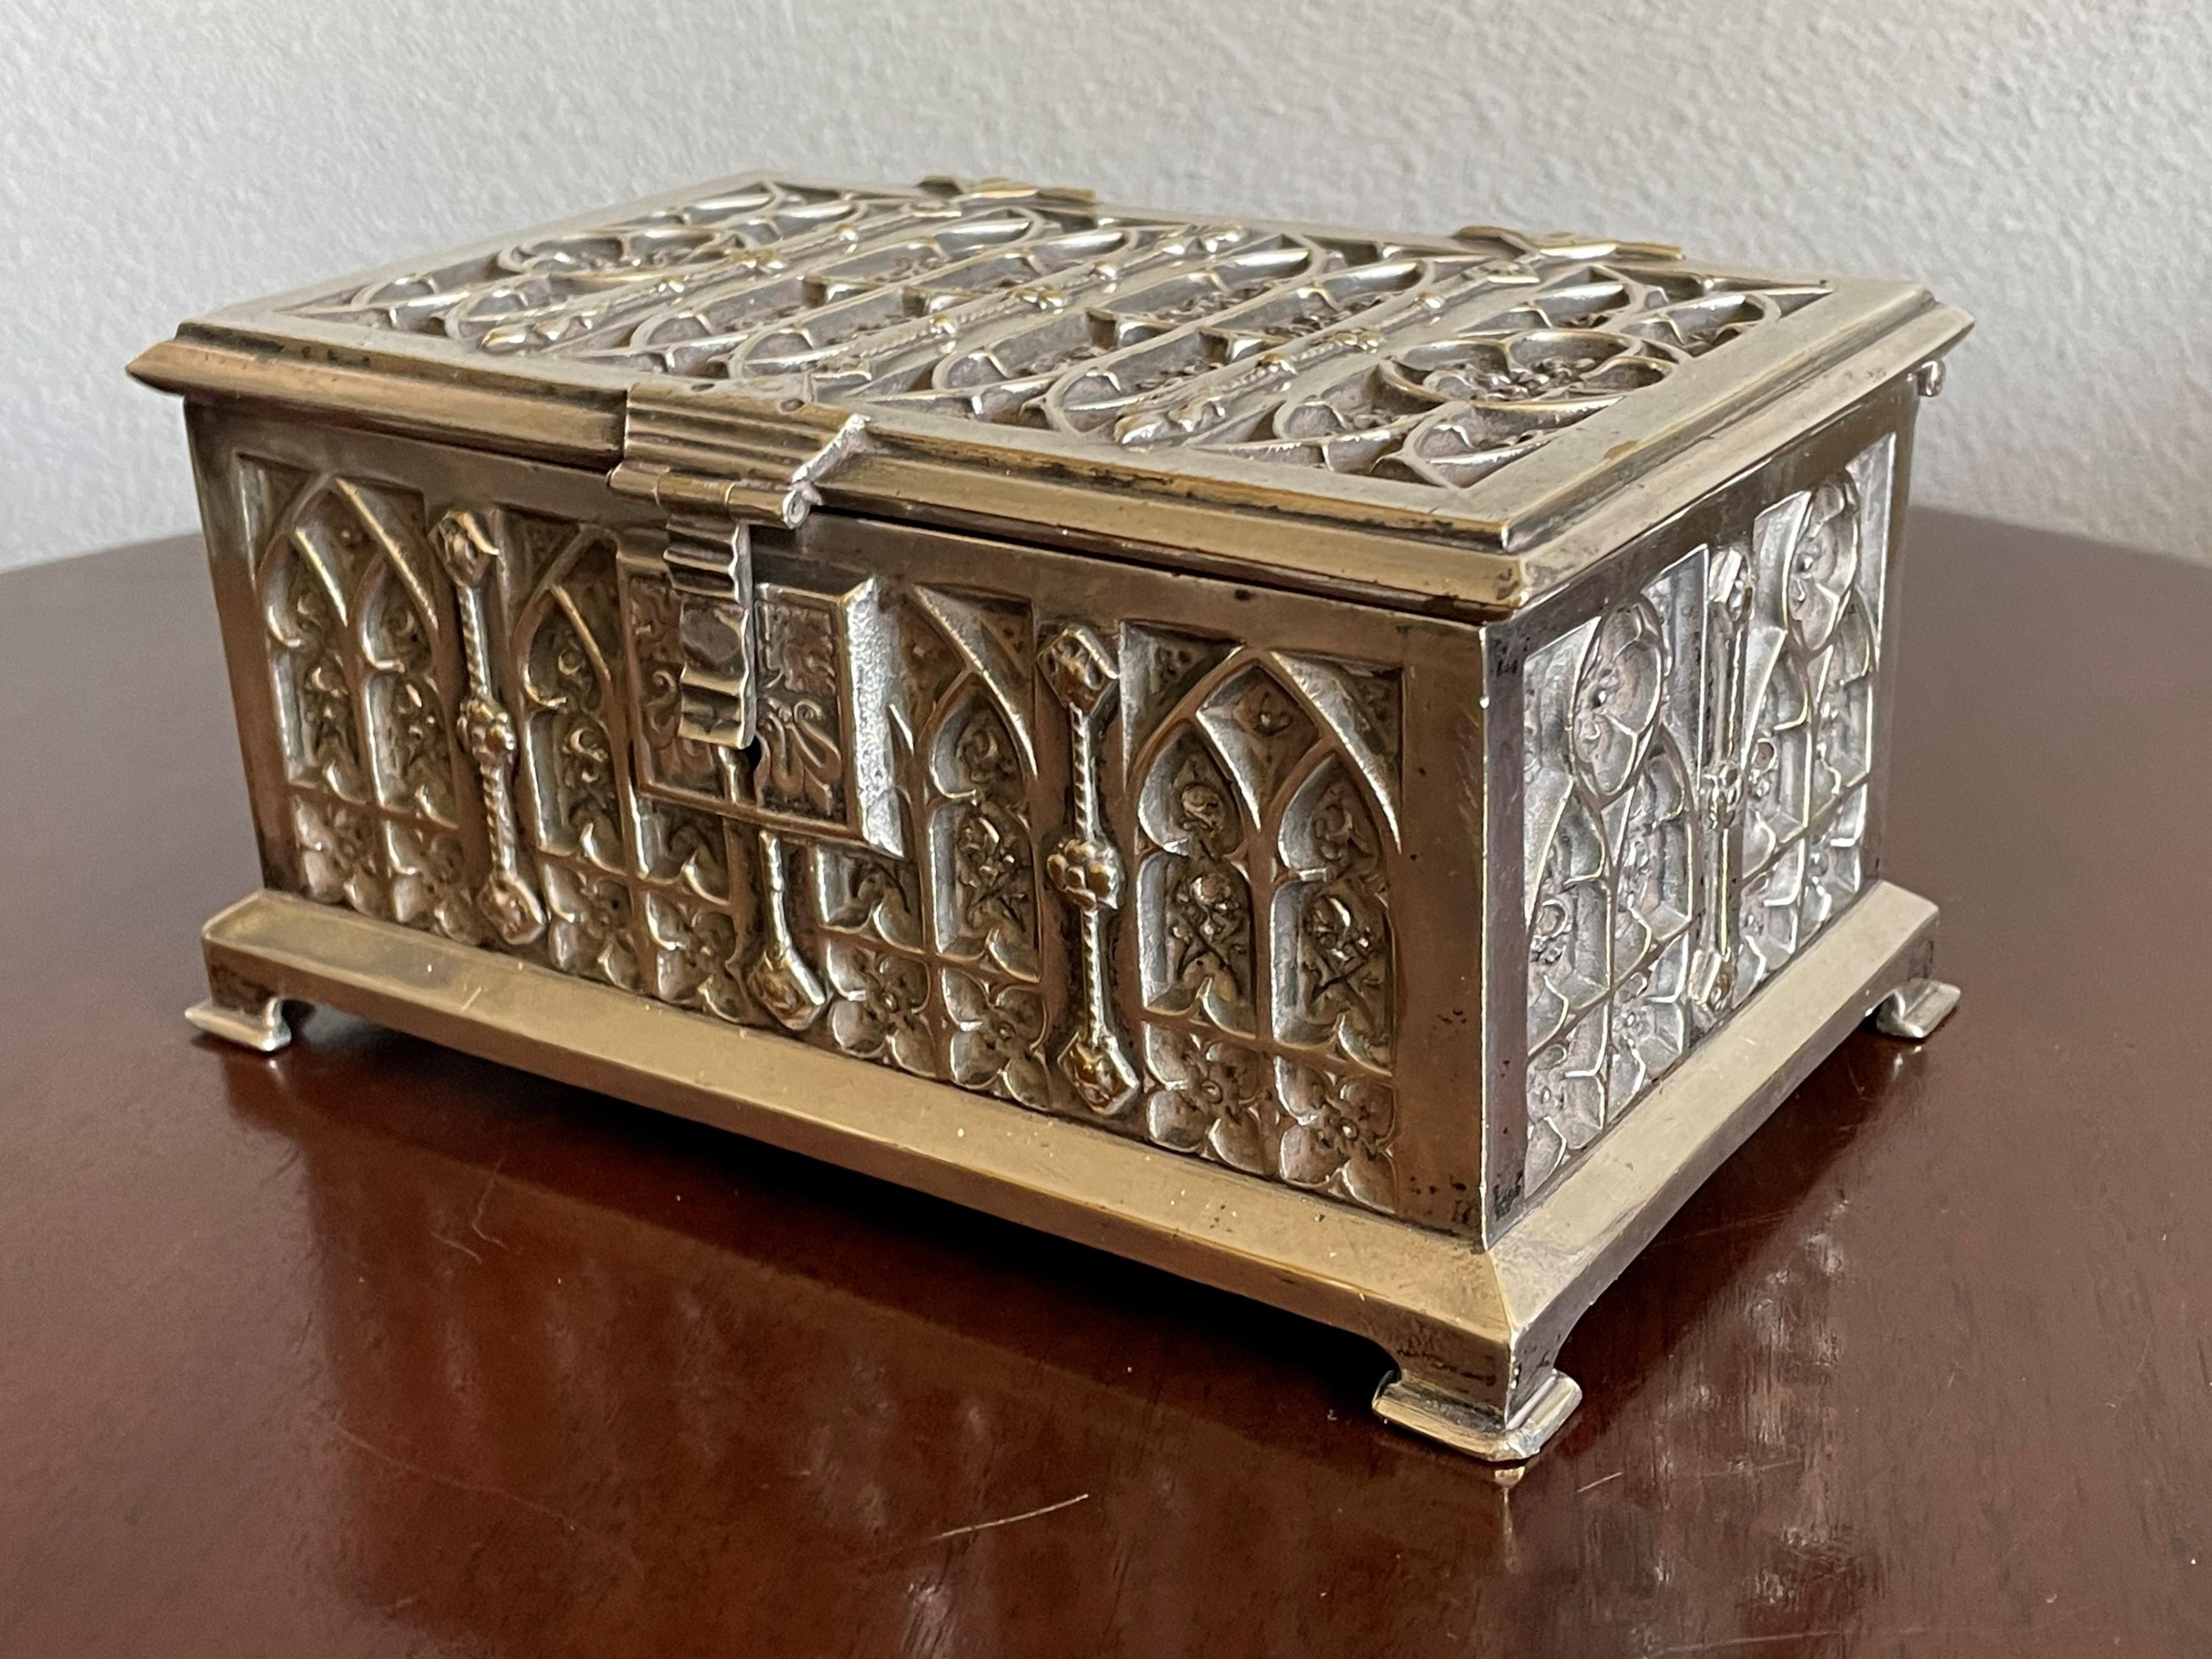 20th Century Stunning Gothic Revival Silvered Bronze Jewelry Box with Church Window Panels